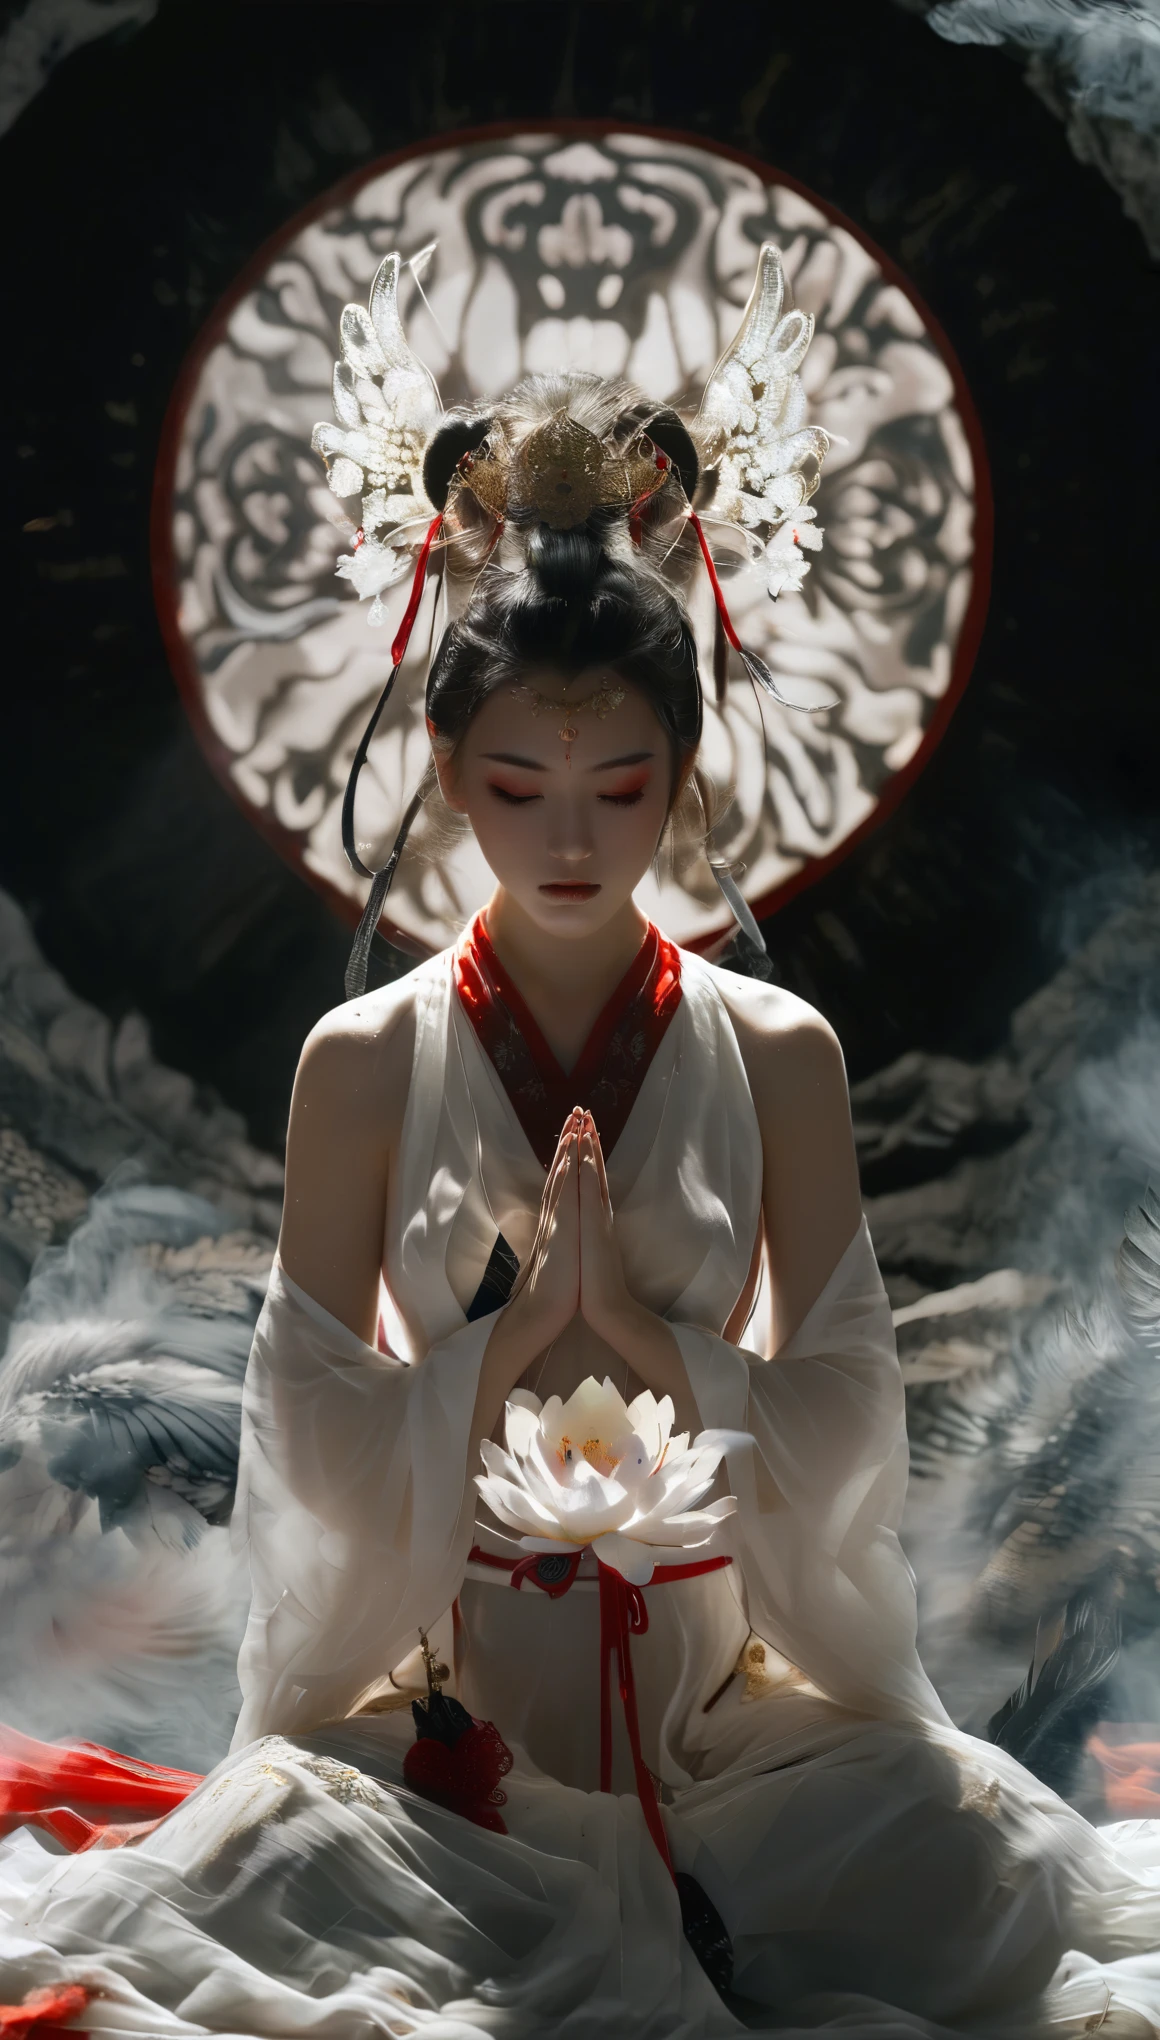 a bird's eye view capturing a stunningly beautiful Japanese shrine maiden clad in a white top and red bottom, striking a prayer pose while exuding an aura of serenity. However, looming ominously behind her, a vengeful spirit of a samurai manifests in a dark, eerie black aura, adding a chilling contrast to the otherwise tranquil scene. The juxtaposition of the maiden's grace and the samurai's haunting presence creates a captivating image that blends beauty with a touch of supernatural intrigue, inviting viewers to contemplate the duality of peace and vengeance.xianxia